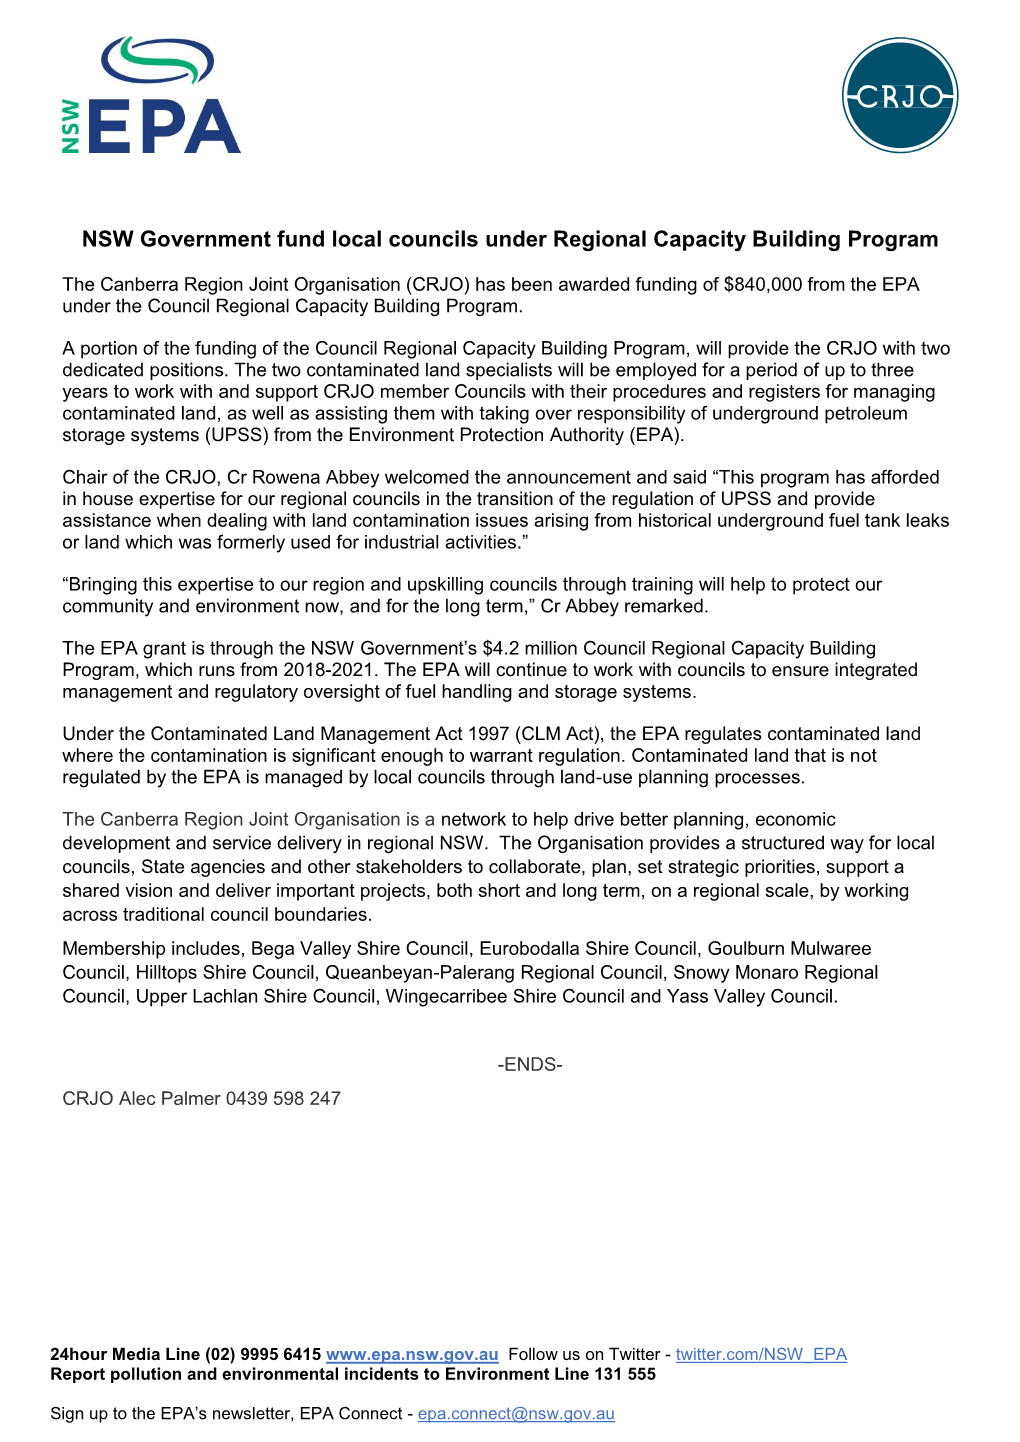 NSW Government Fund Local Councils Under Regional Capacity Building Program